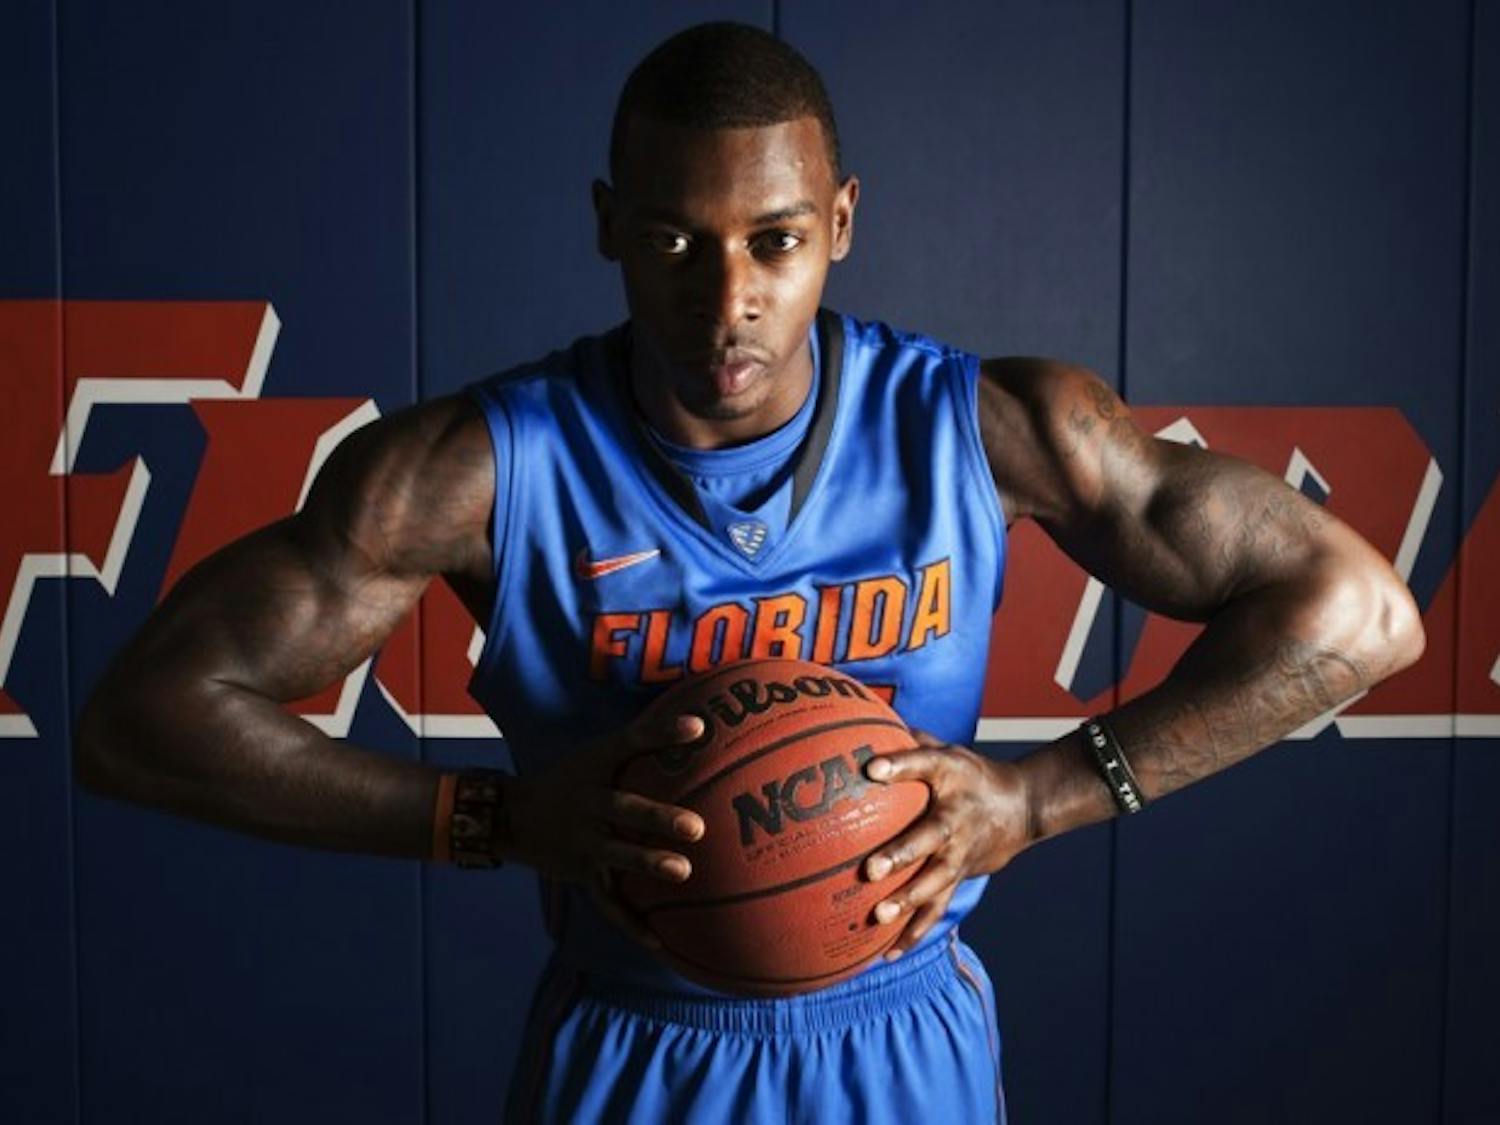 Junior forward Casey Prather poses at Florida's media day on Wednesday. &nbsp;Prather rarely played in his first two seasons before shining in the 2012 NCAA Tournament.